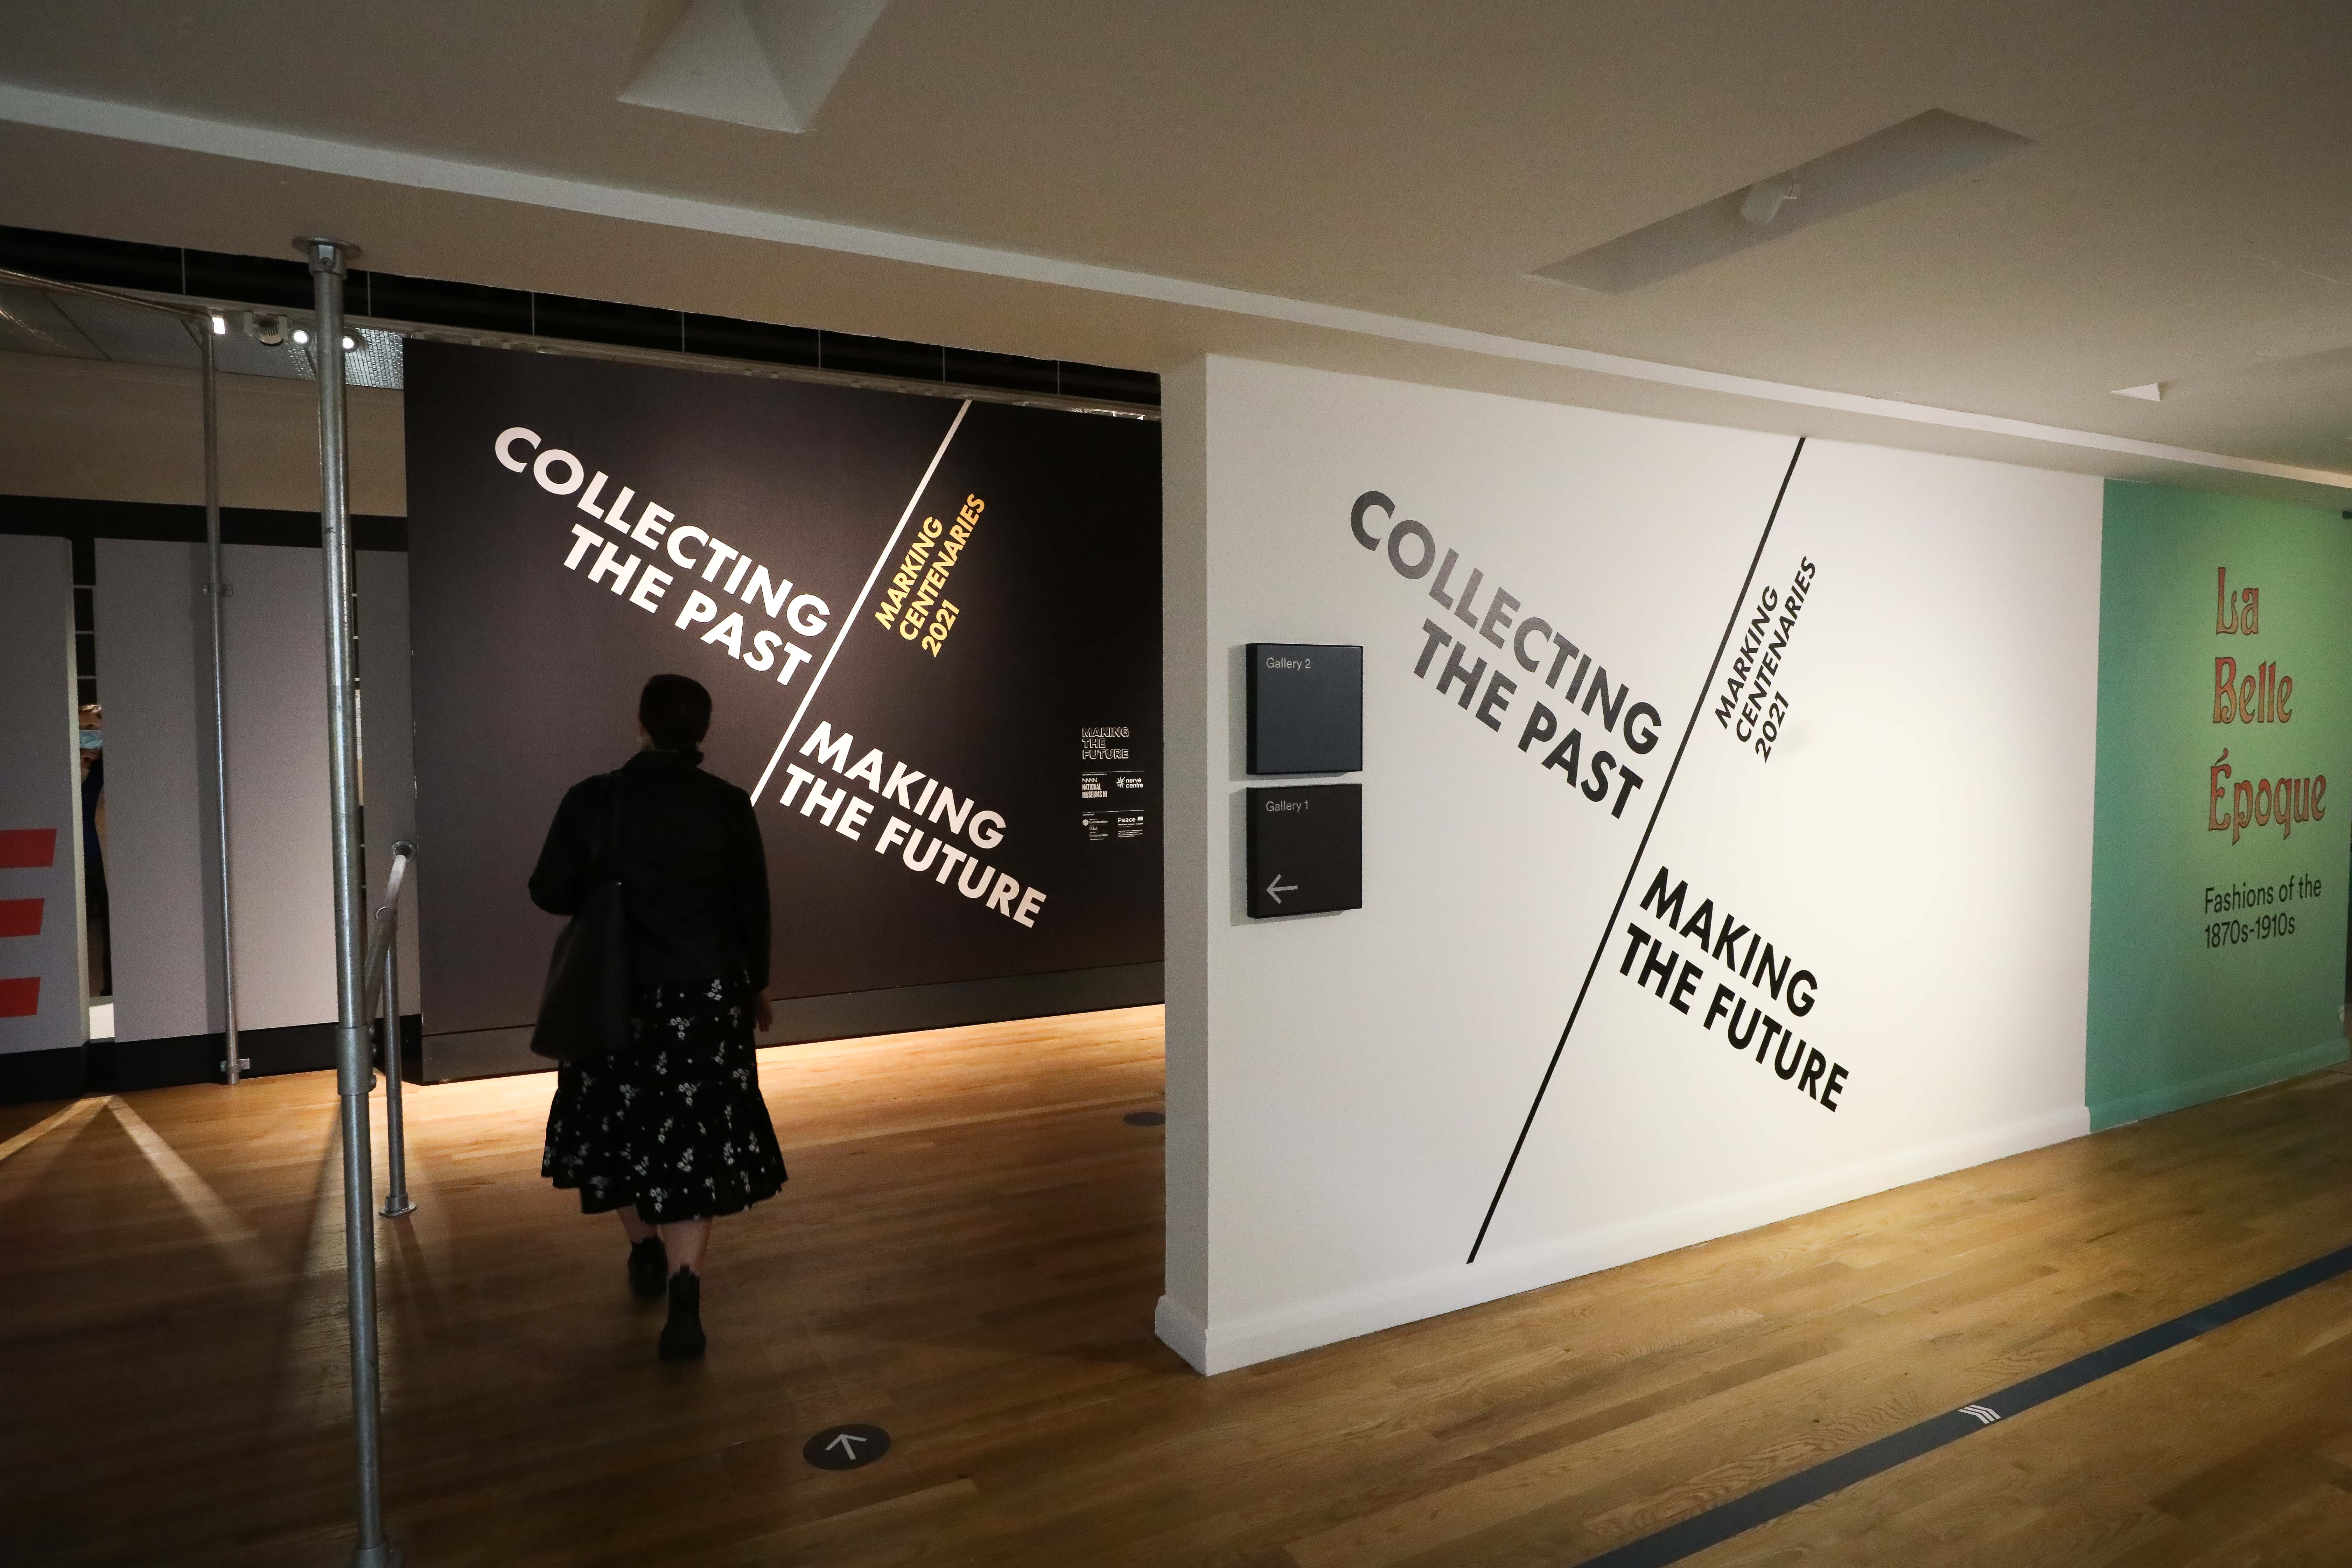 Digital Version of Collecting the Past/Making the Future Exhibition is Launched Online